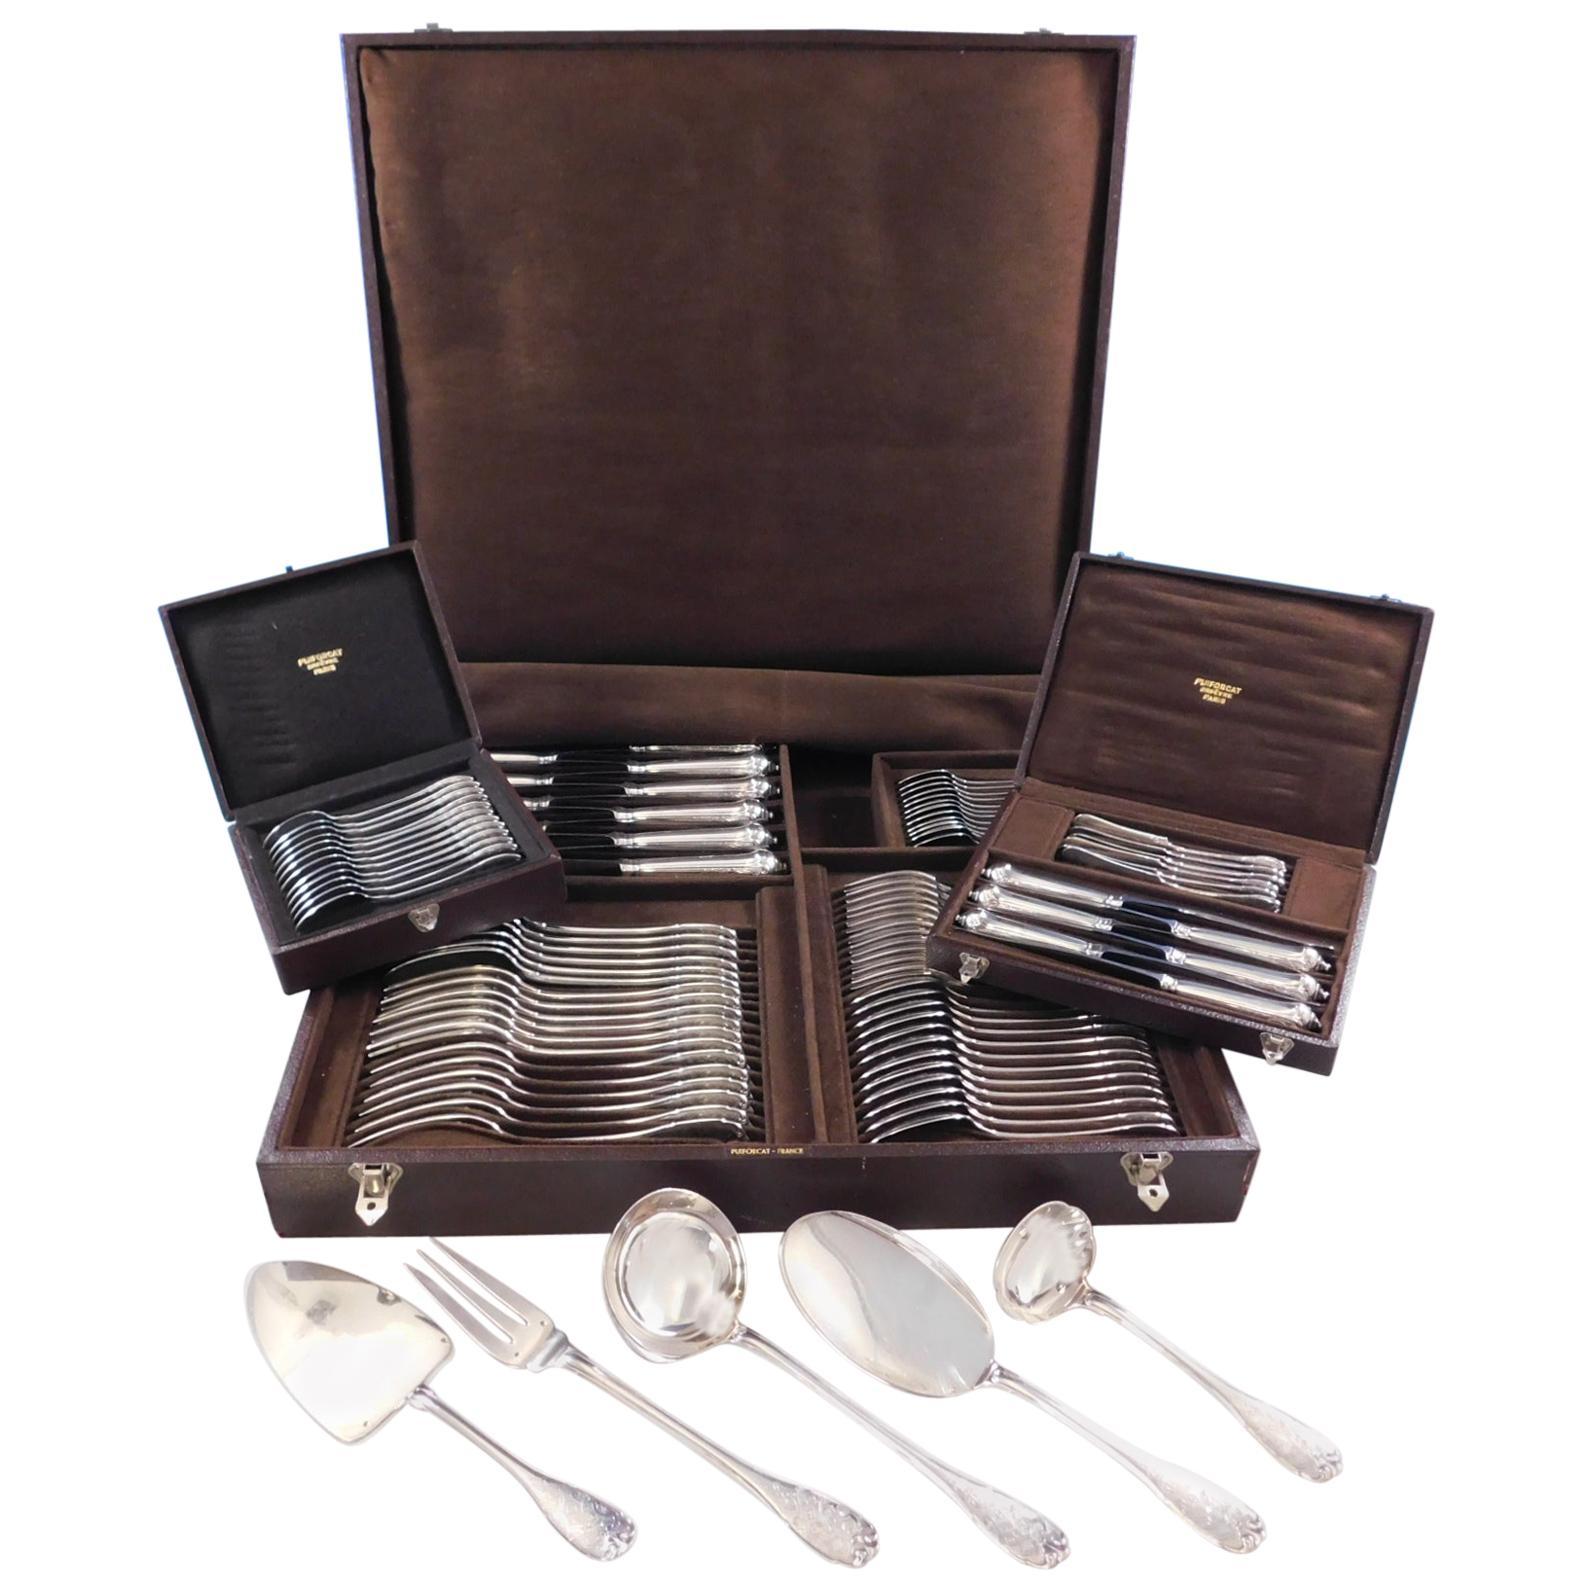 Elysee by Puiforcat French Sterling Silver Silverware Set Dinner Service 95 Pcs